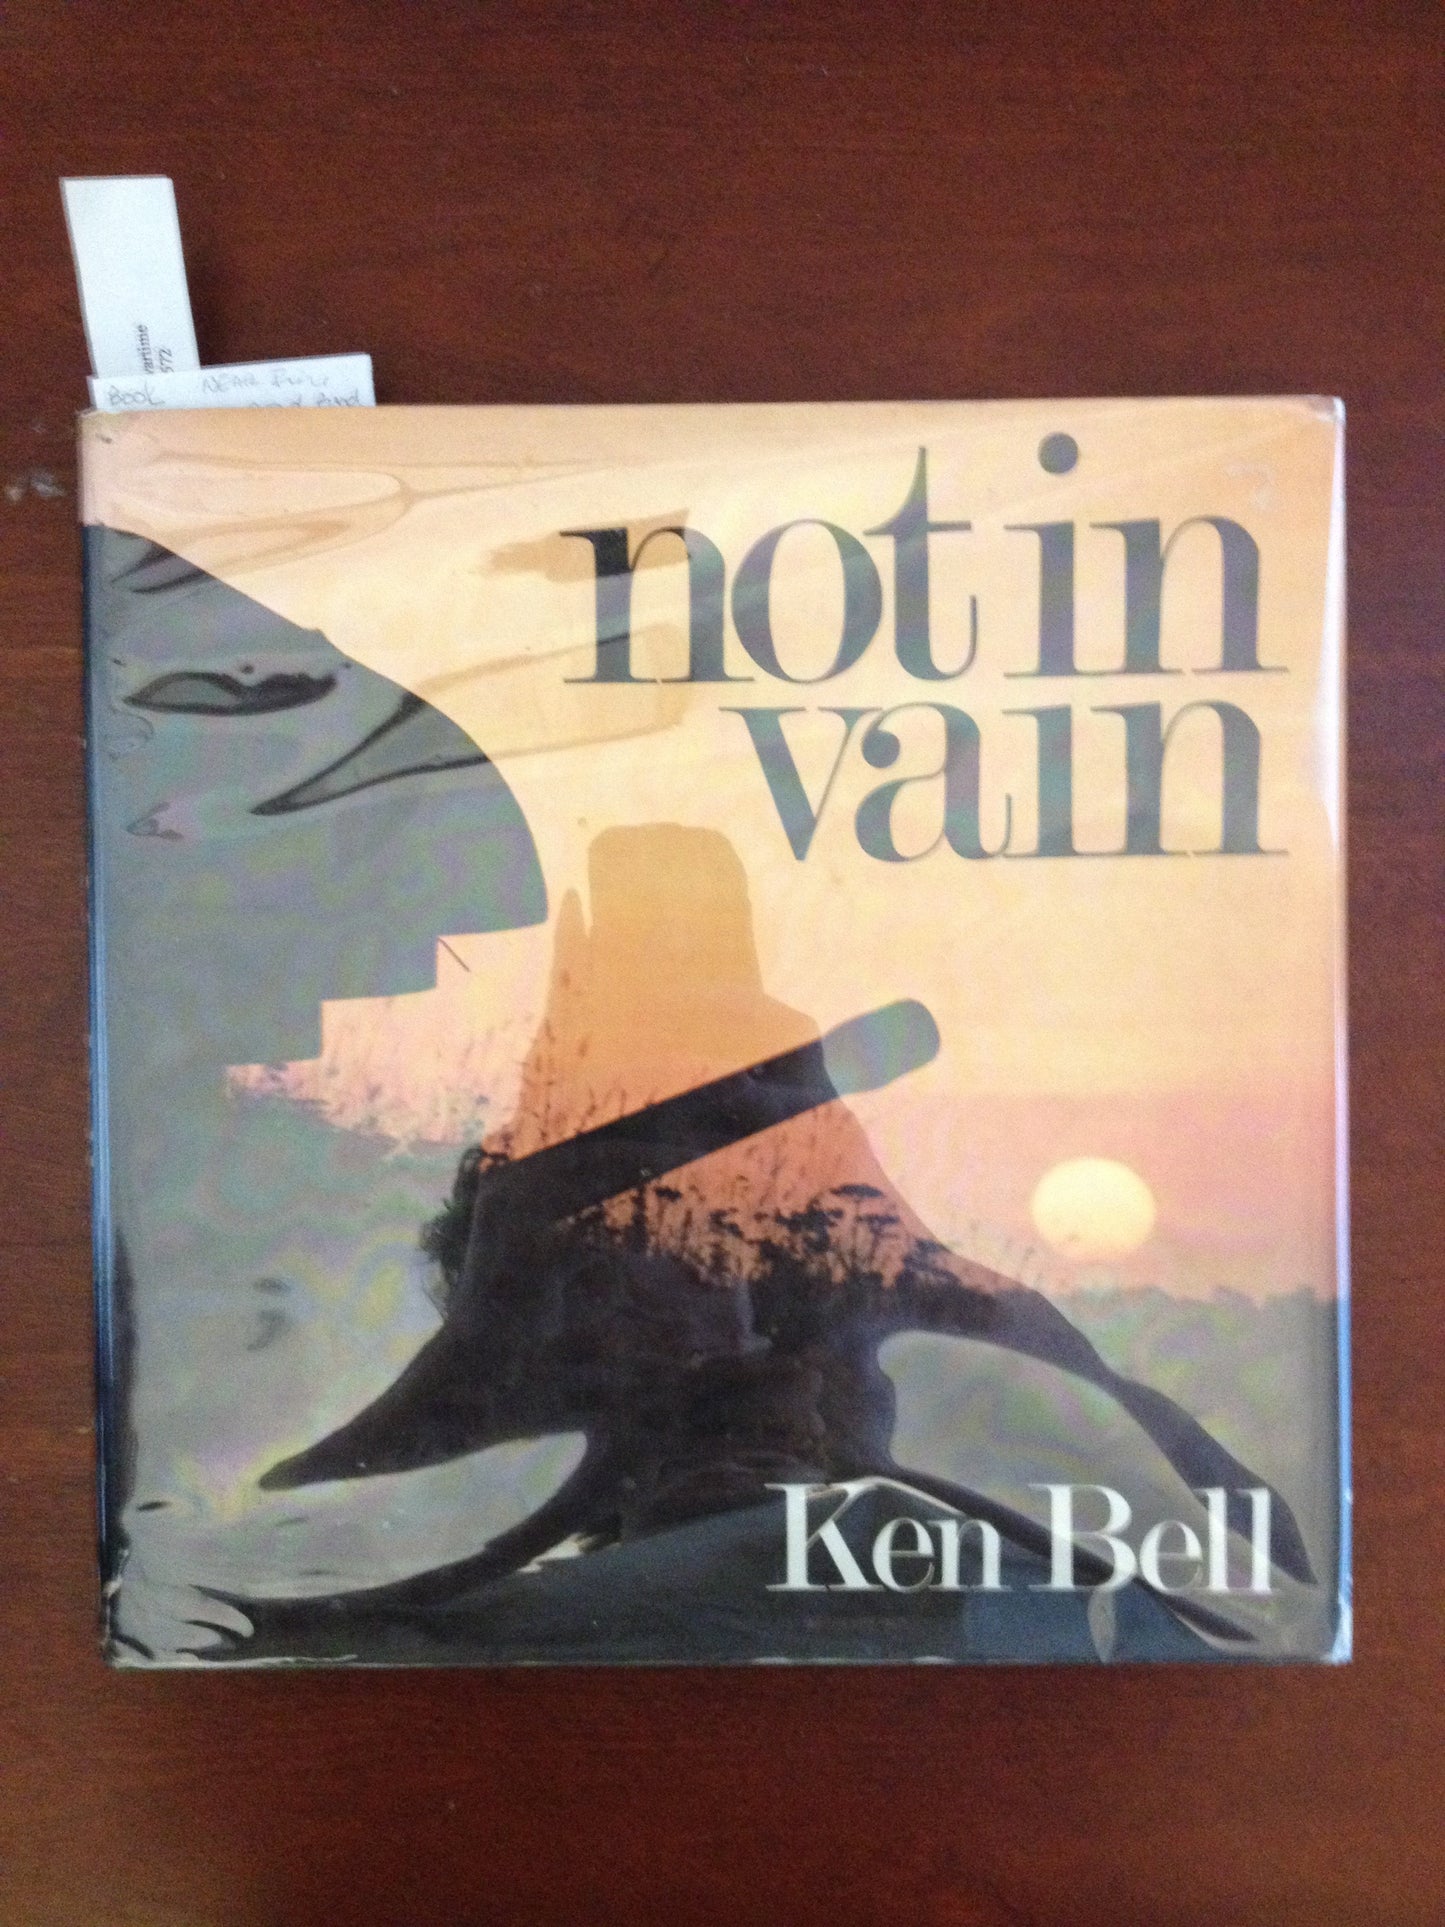 NOT IN VAIN BY: KEN BELL BooksCardsNBikes